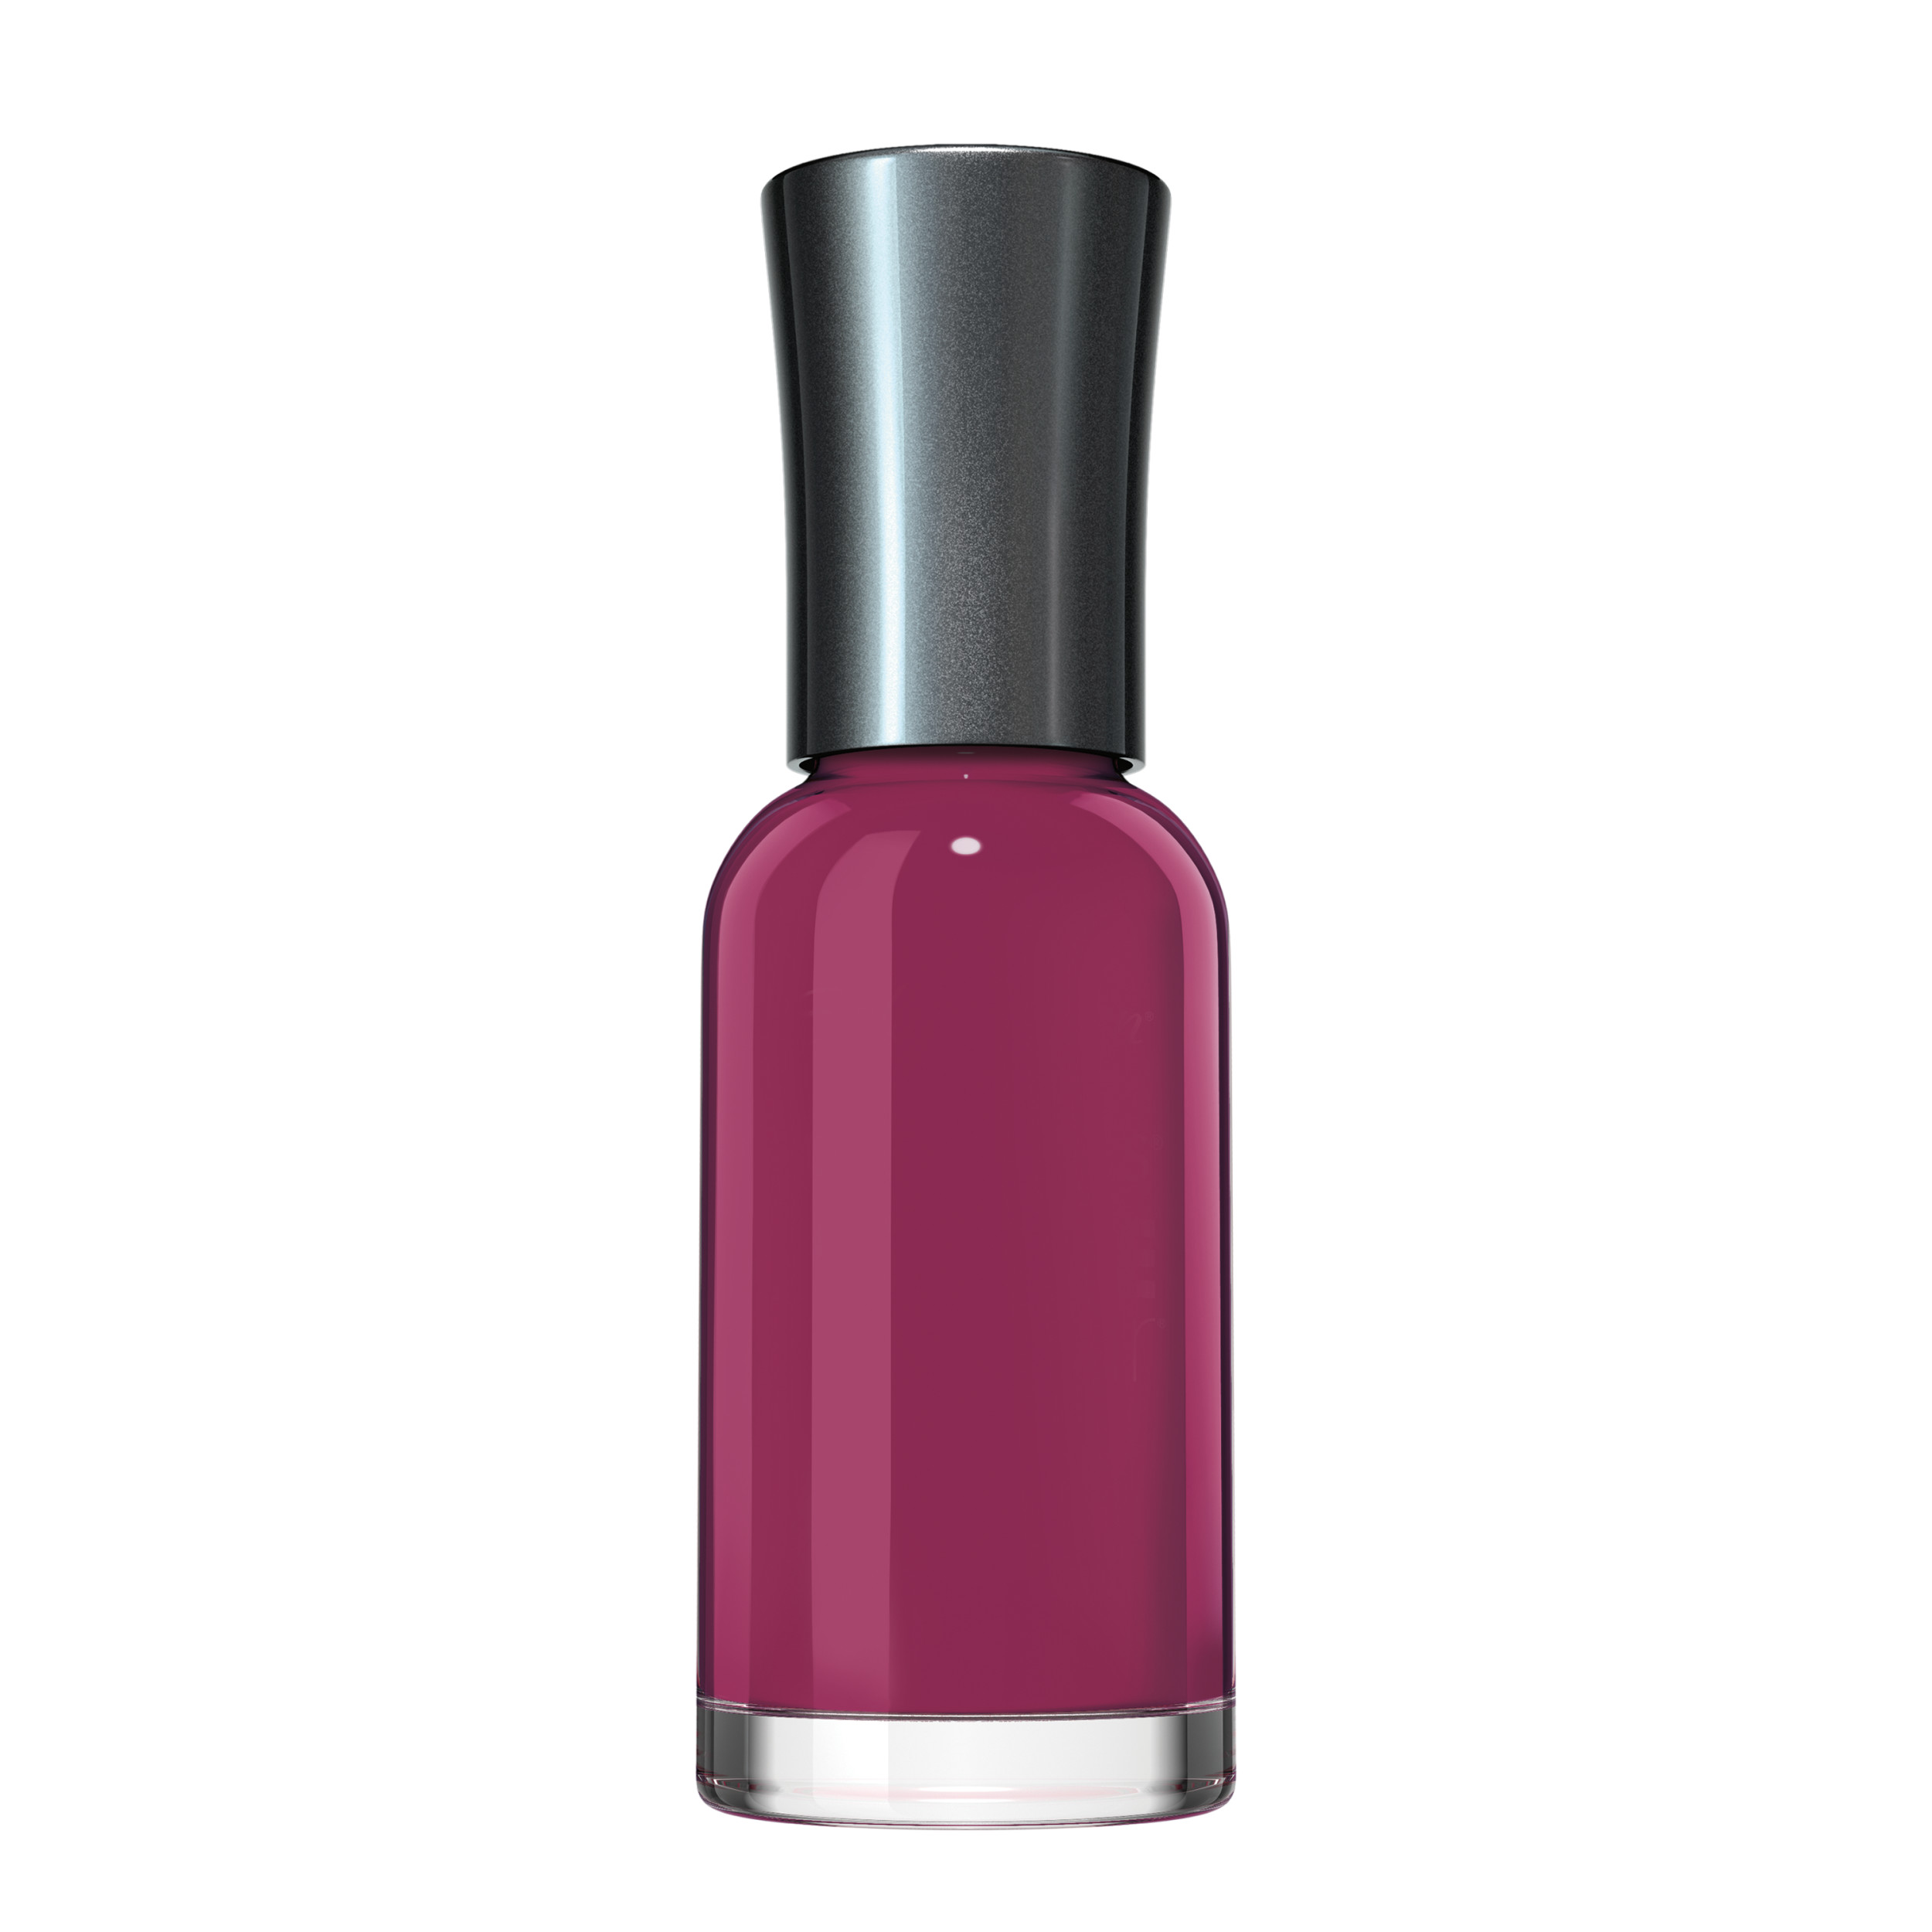 Sally Hansen Xtreme Wear Nail Polish, Drop The Beet, 0.4 fl oz, Chip Resistant, Bold Color - image 9 of 14